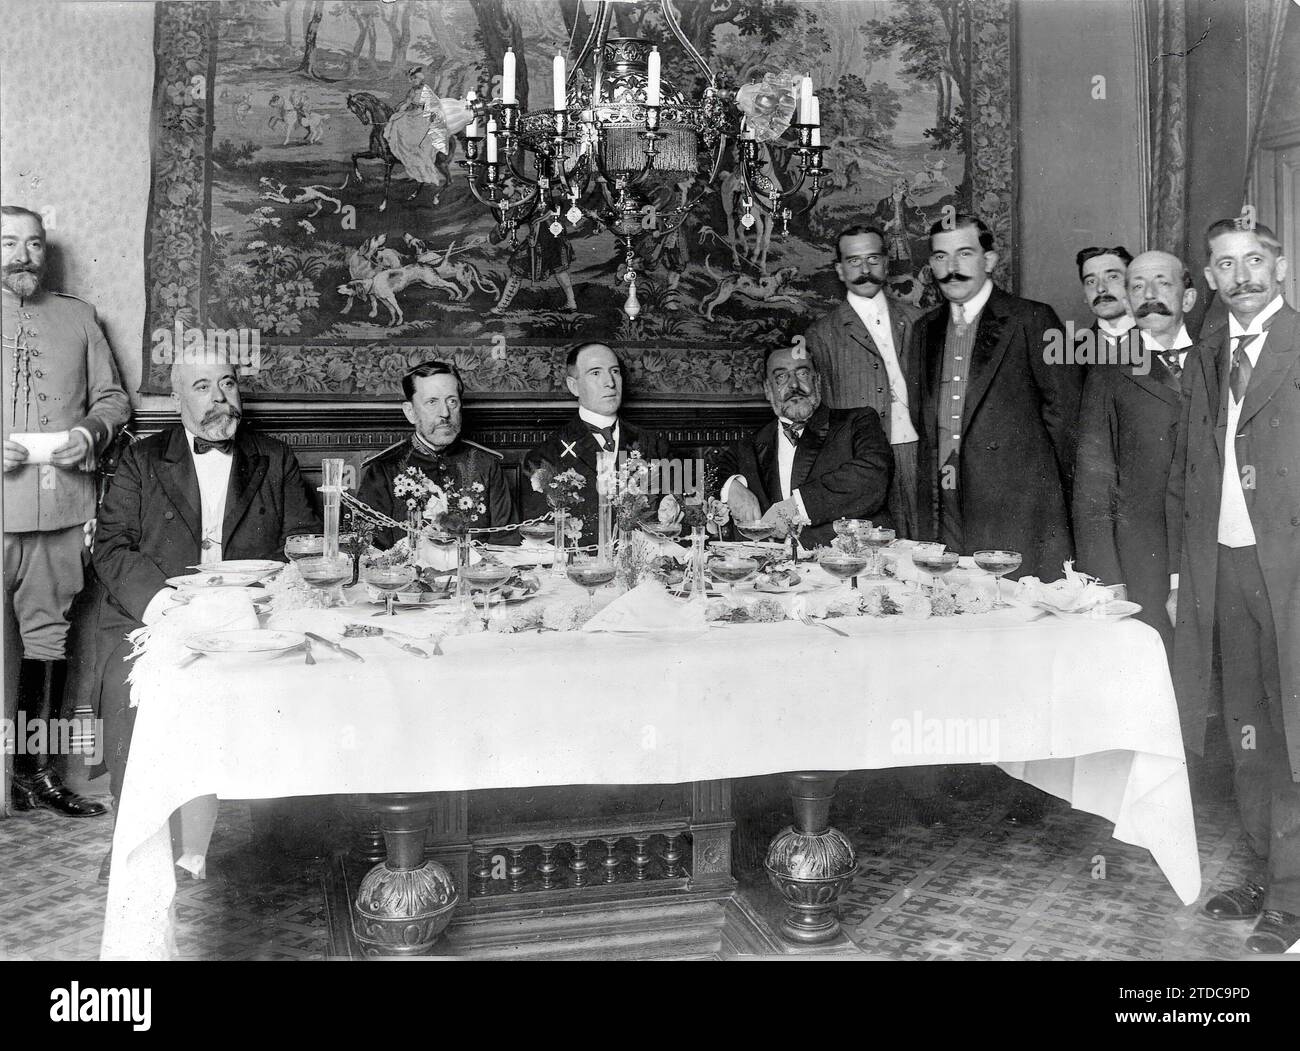 Madrid, September 1910. Centenary of the Independence of Mexico. Banquet at the consulate. The vice consul (X), to his right General Weyler, and to his left the Civil Governor, Mr. Muñoz, at the presidential table. Credit: Album / Archivo ABC / Federico Ballell Stock Photo